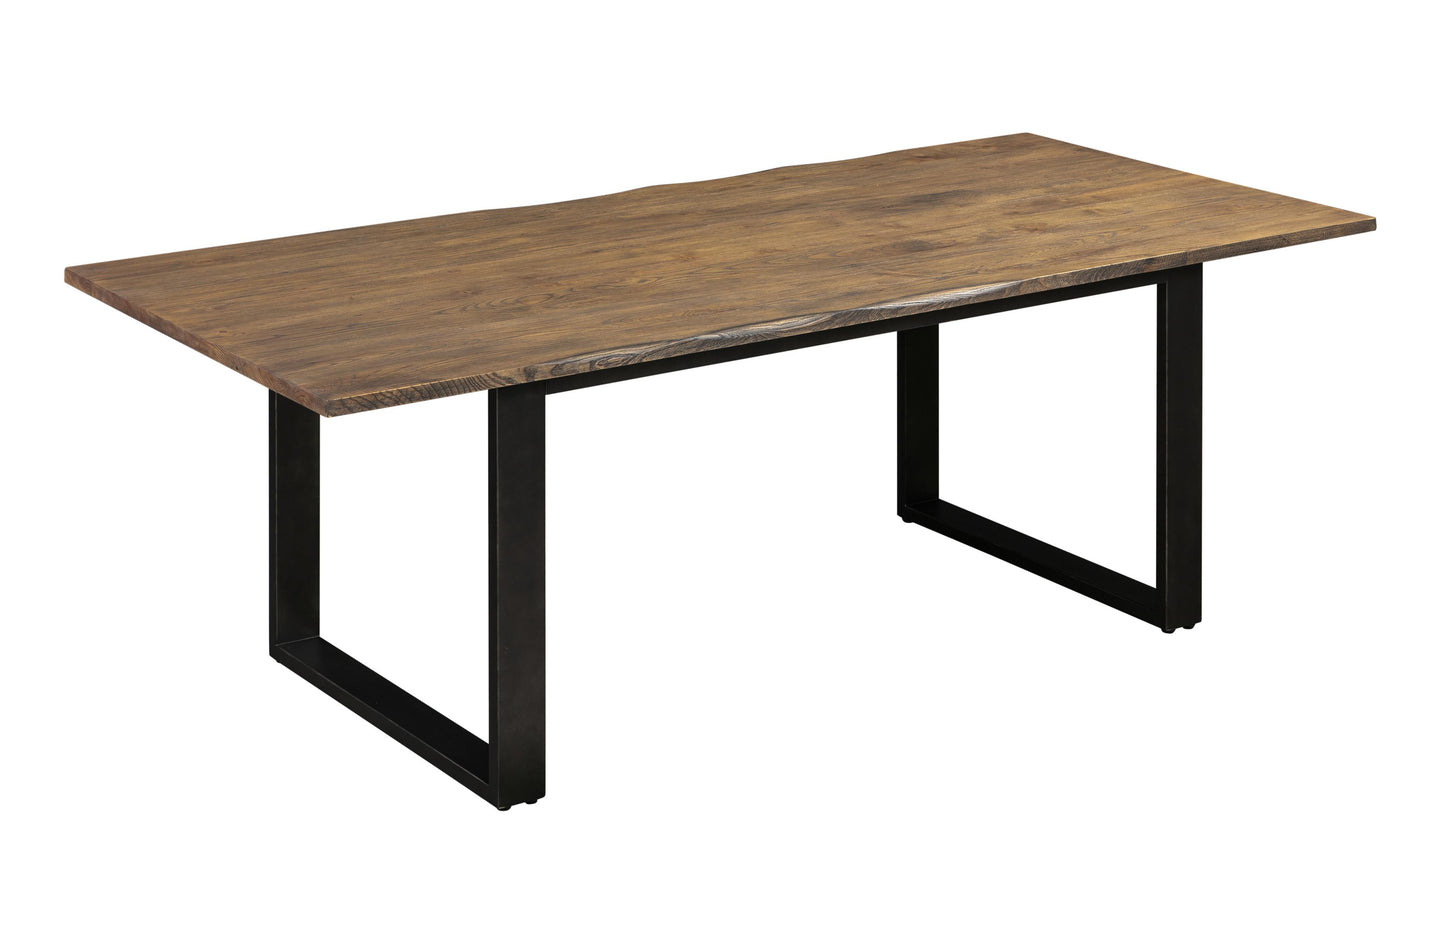 Tov Furniture Carter Rustic Dining Table